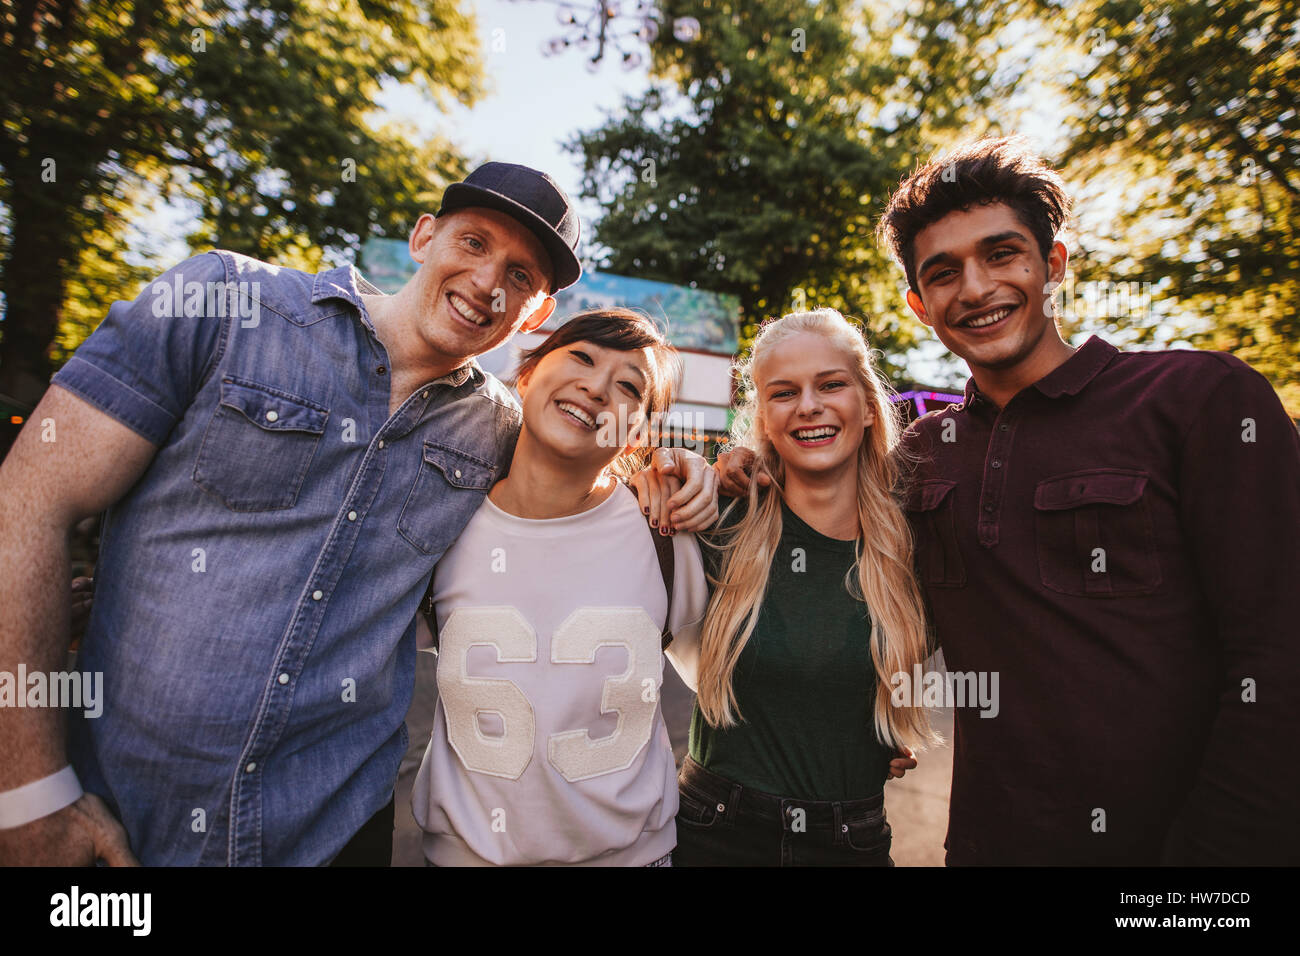 Multiracial friends standing together in amusement park. Group of friends in amusement park looking at camera and smiling. Stock Photo